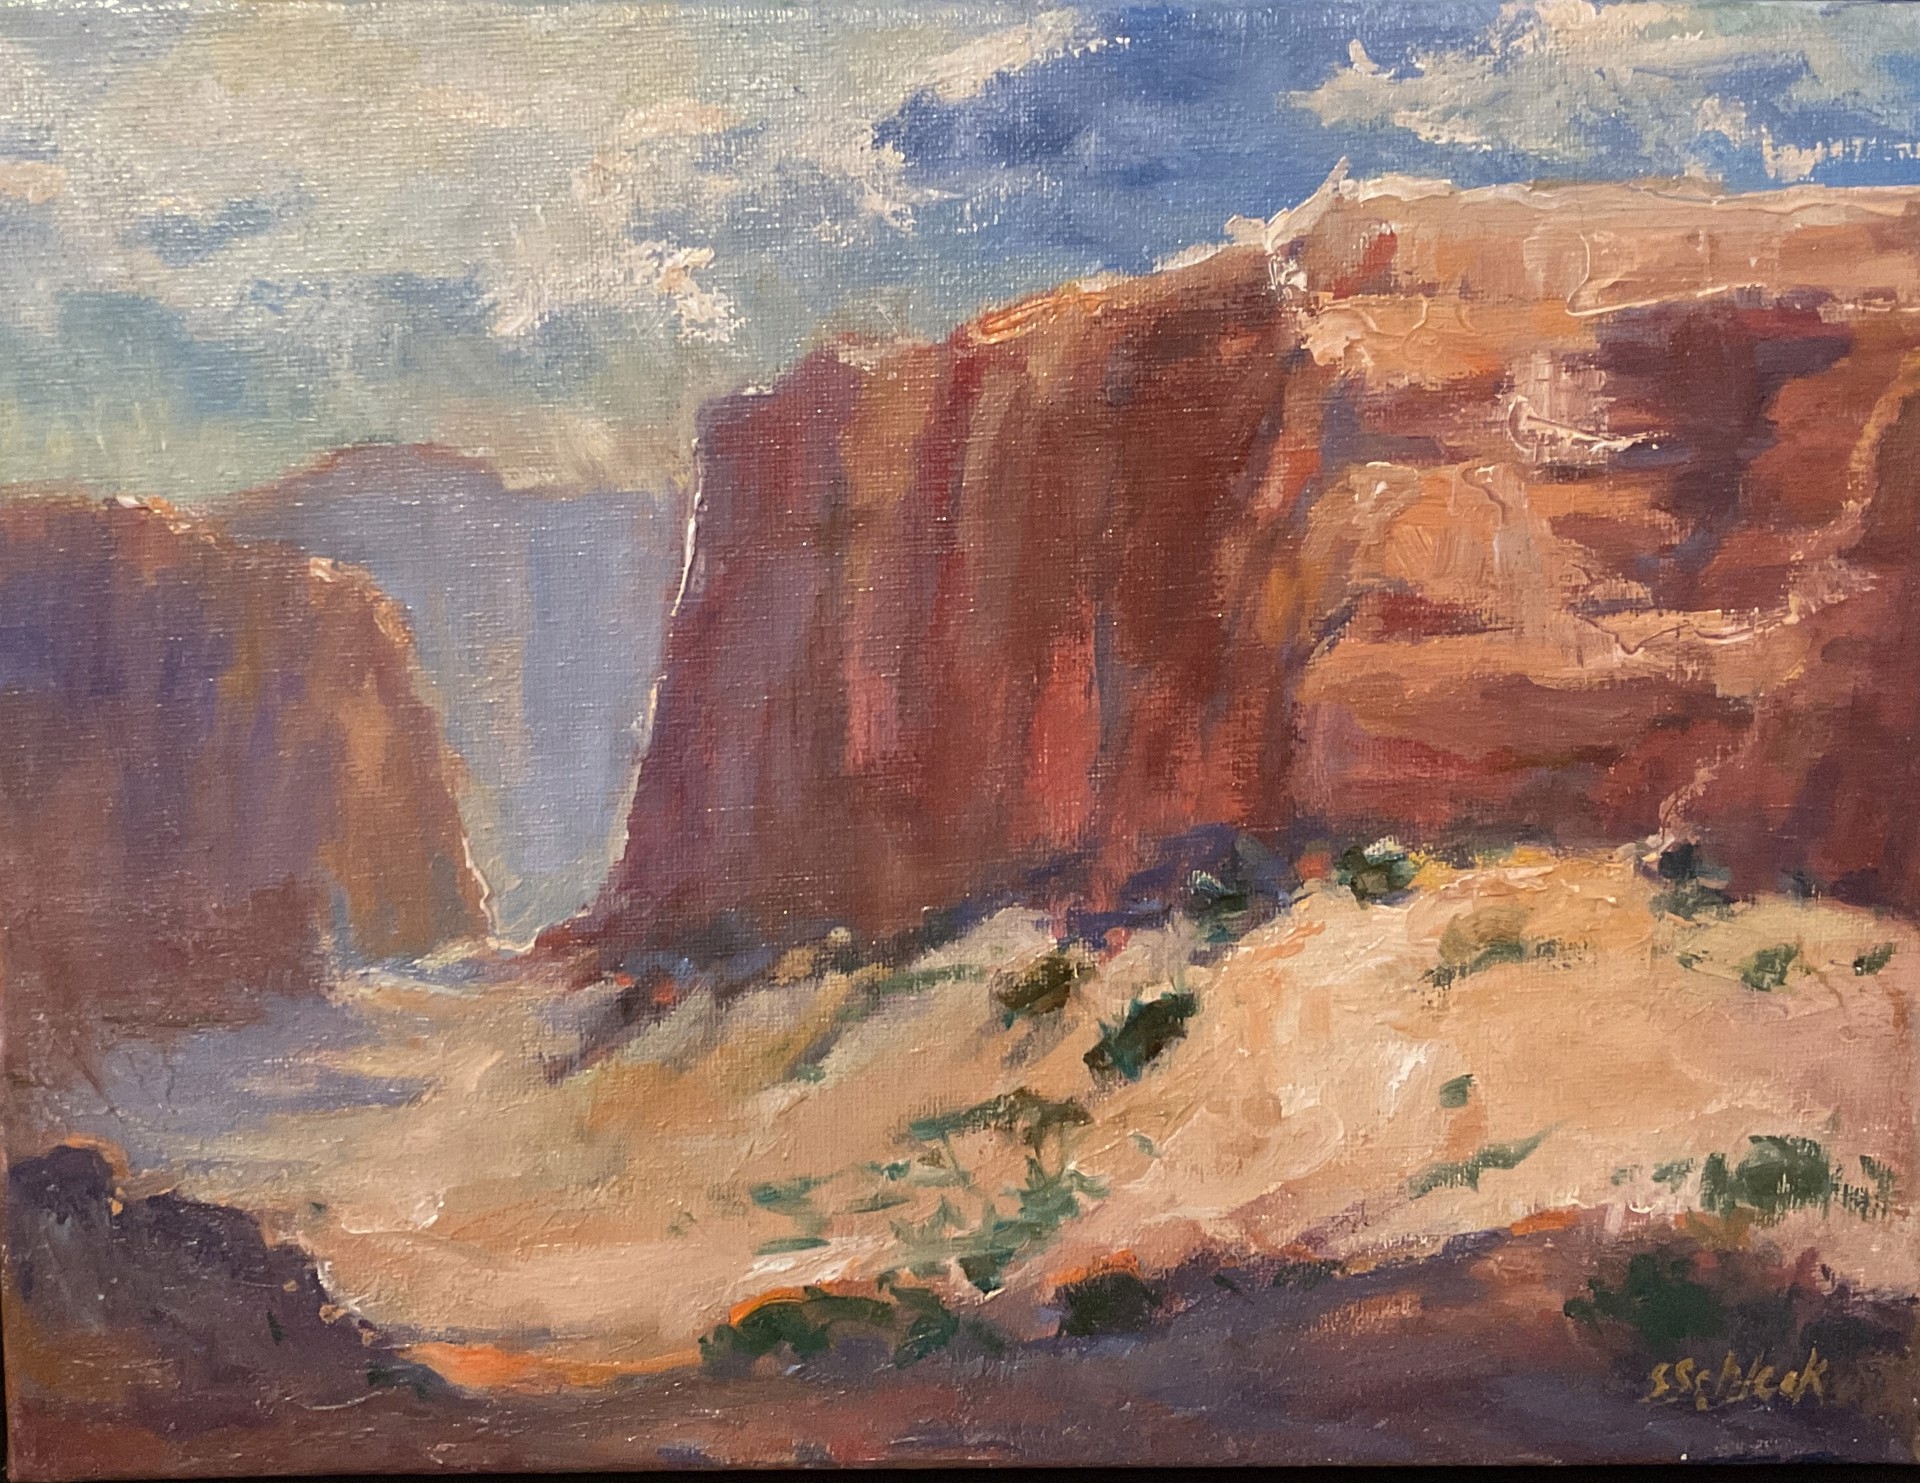 "Ghost Ranch Red Wall" by Suzanne Schleck